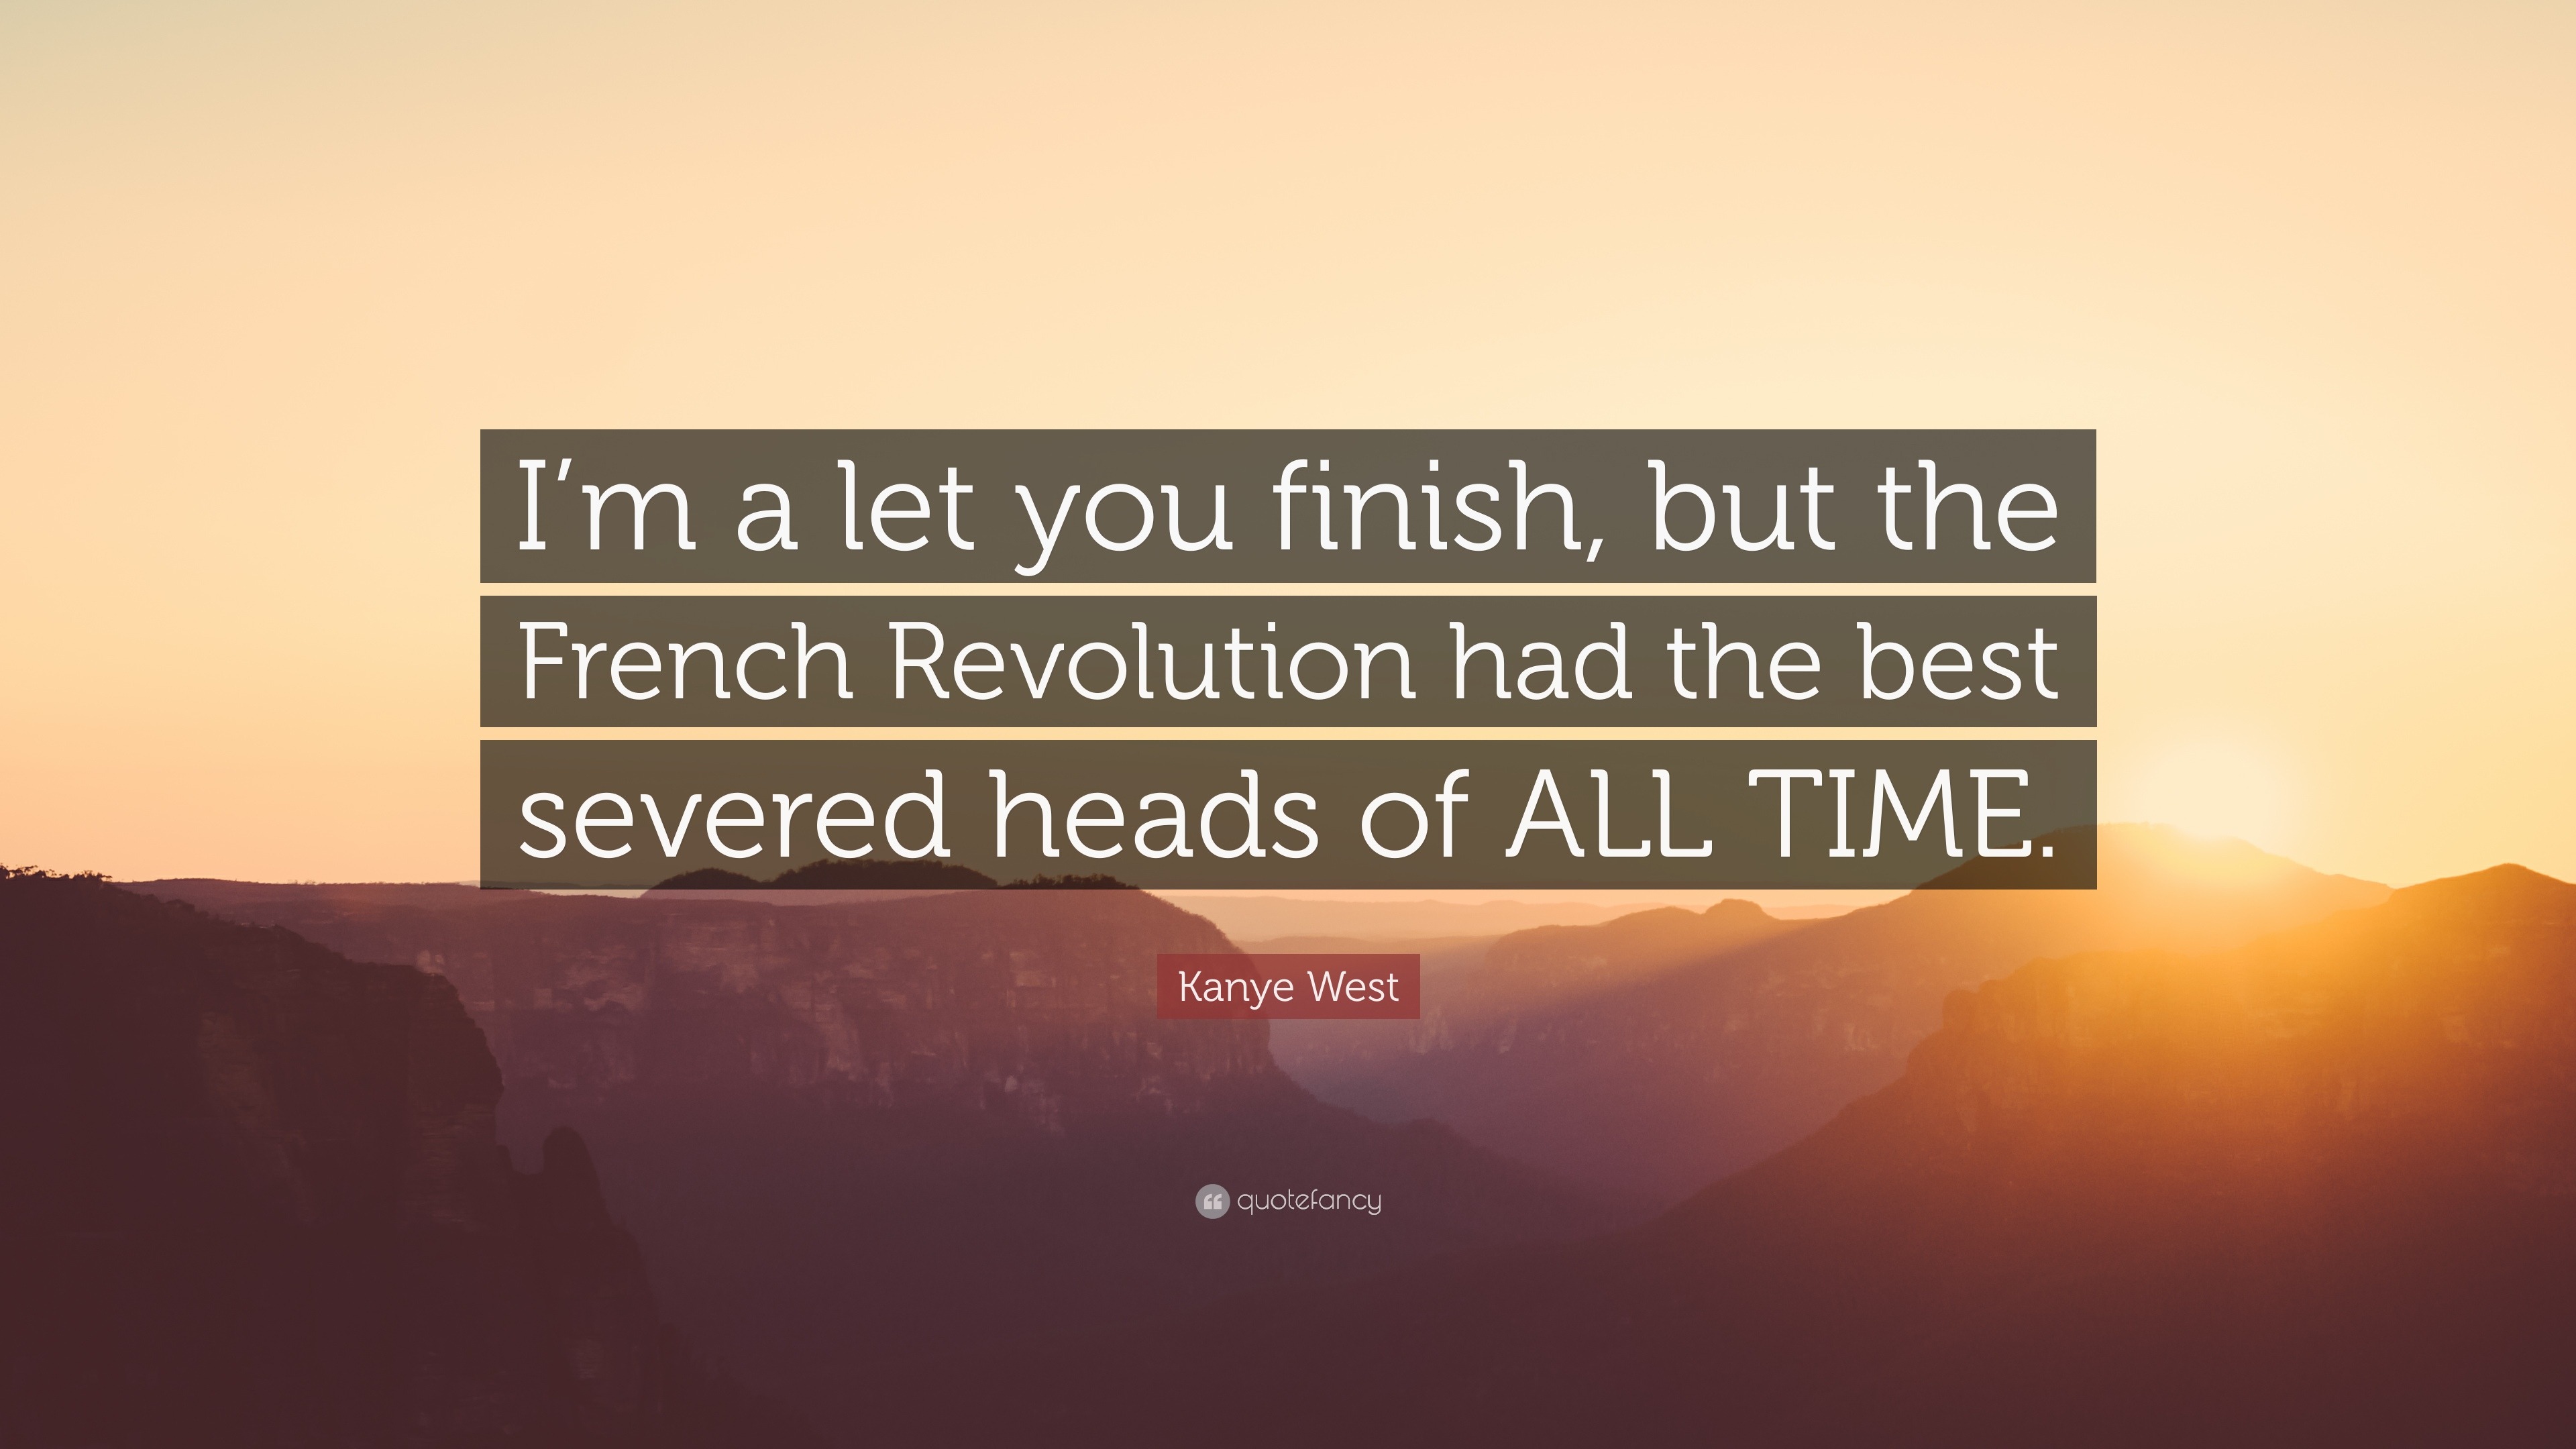 Kanye West Quote: “I'm a let you finish, but the French Revolution